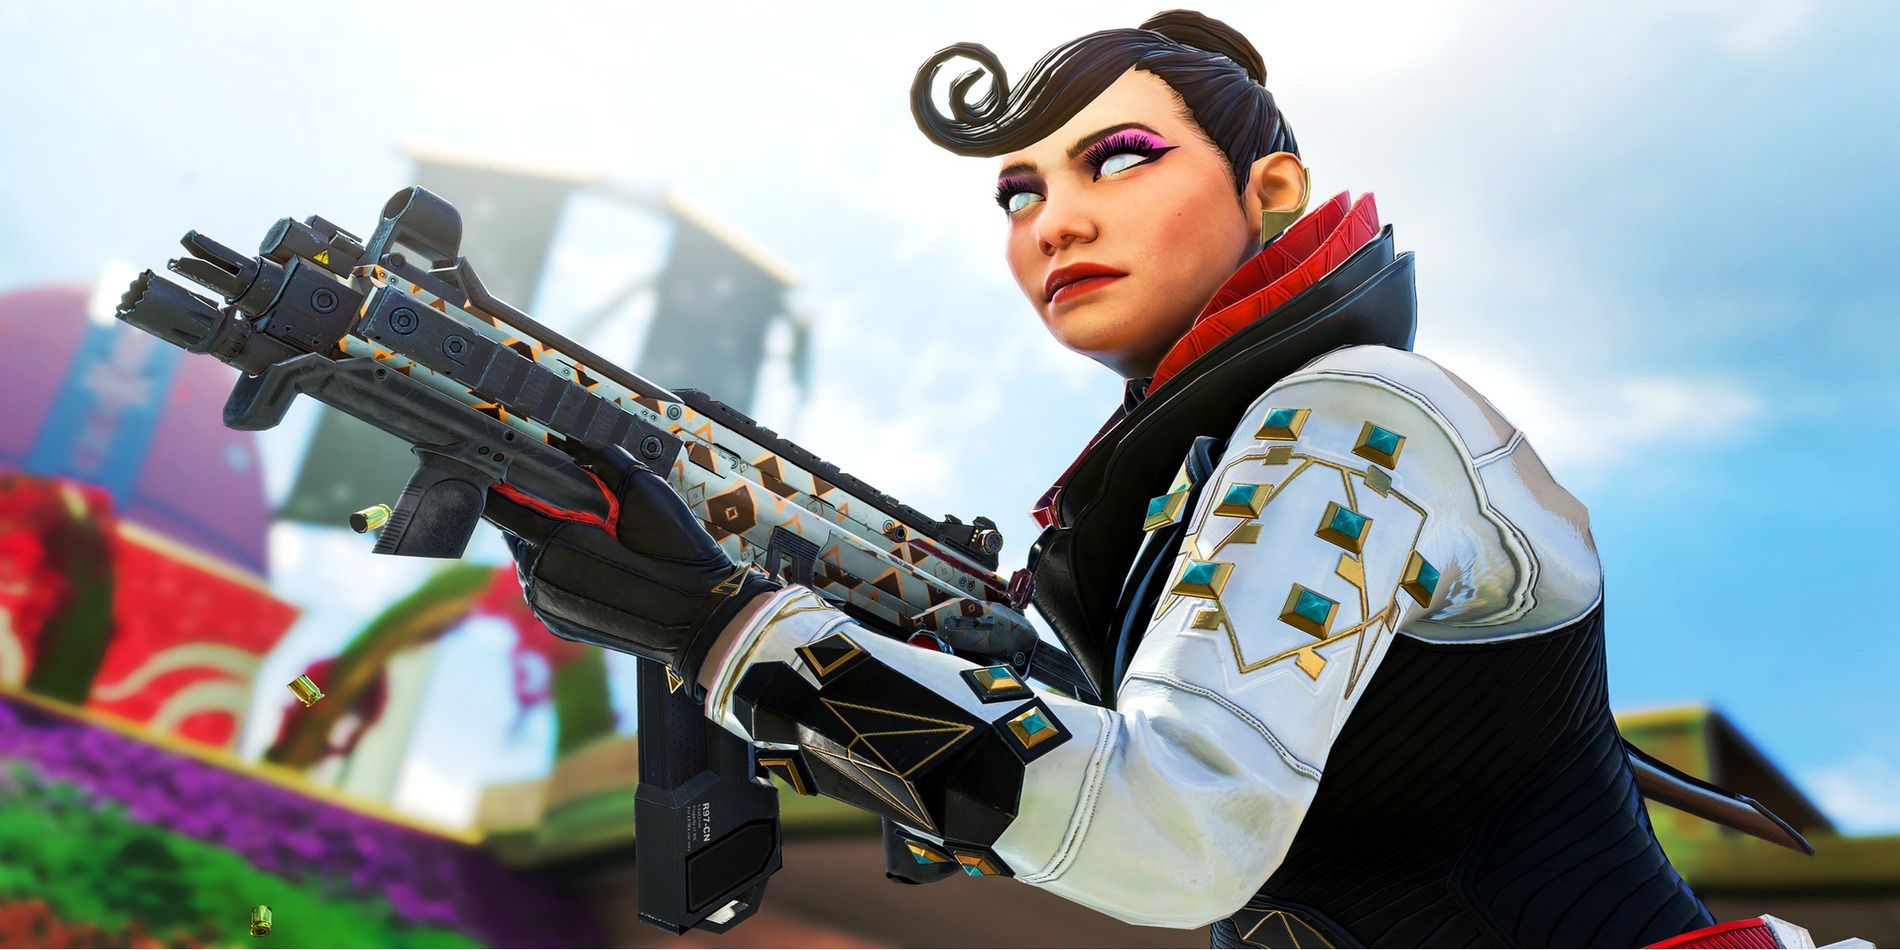 Wraith holding an R-99 in Apex Legends